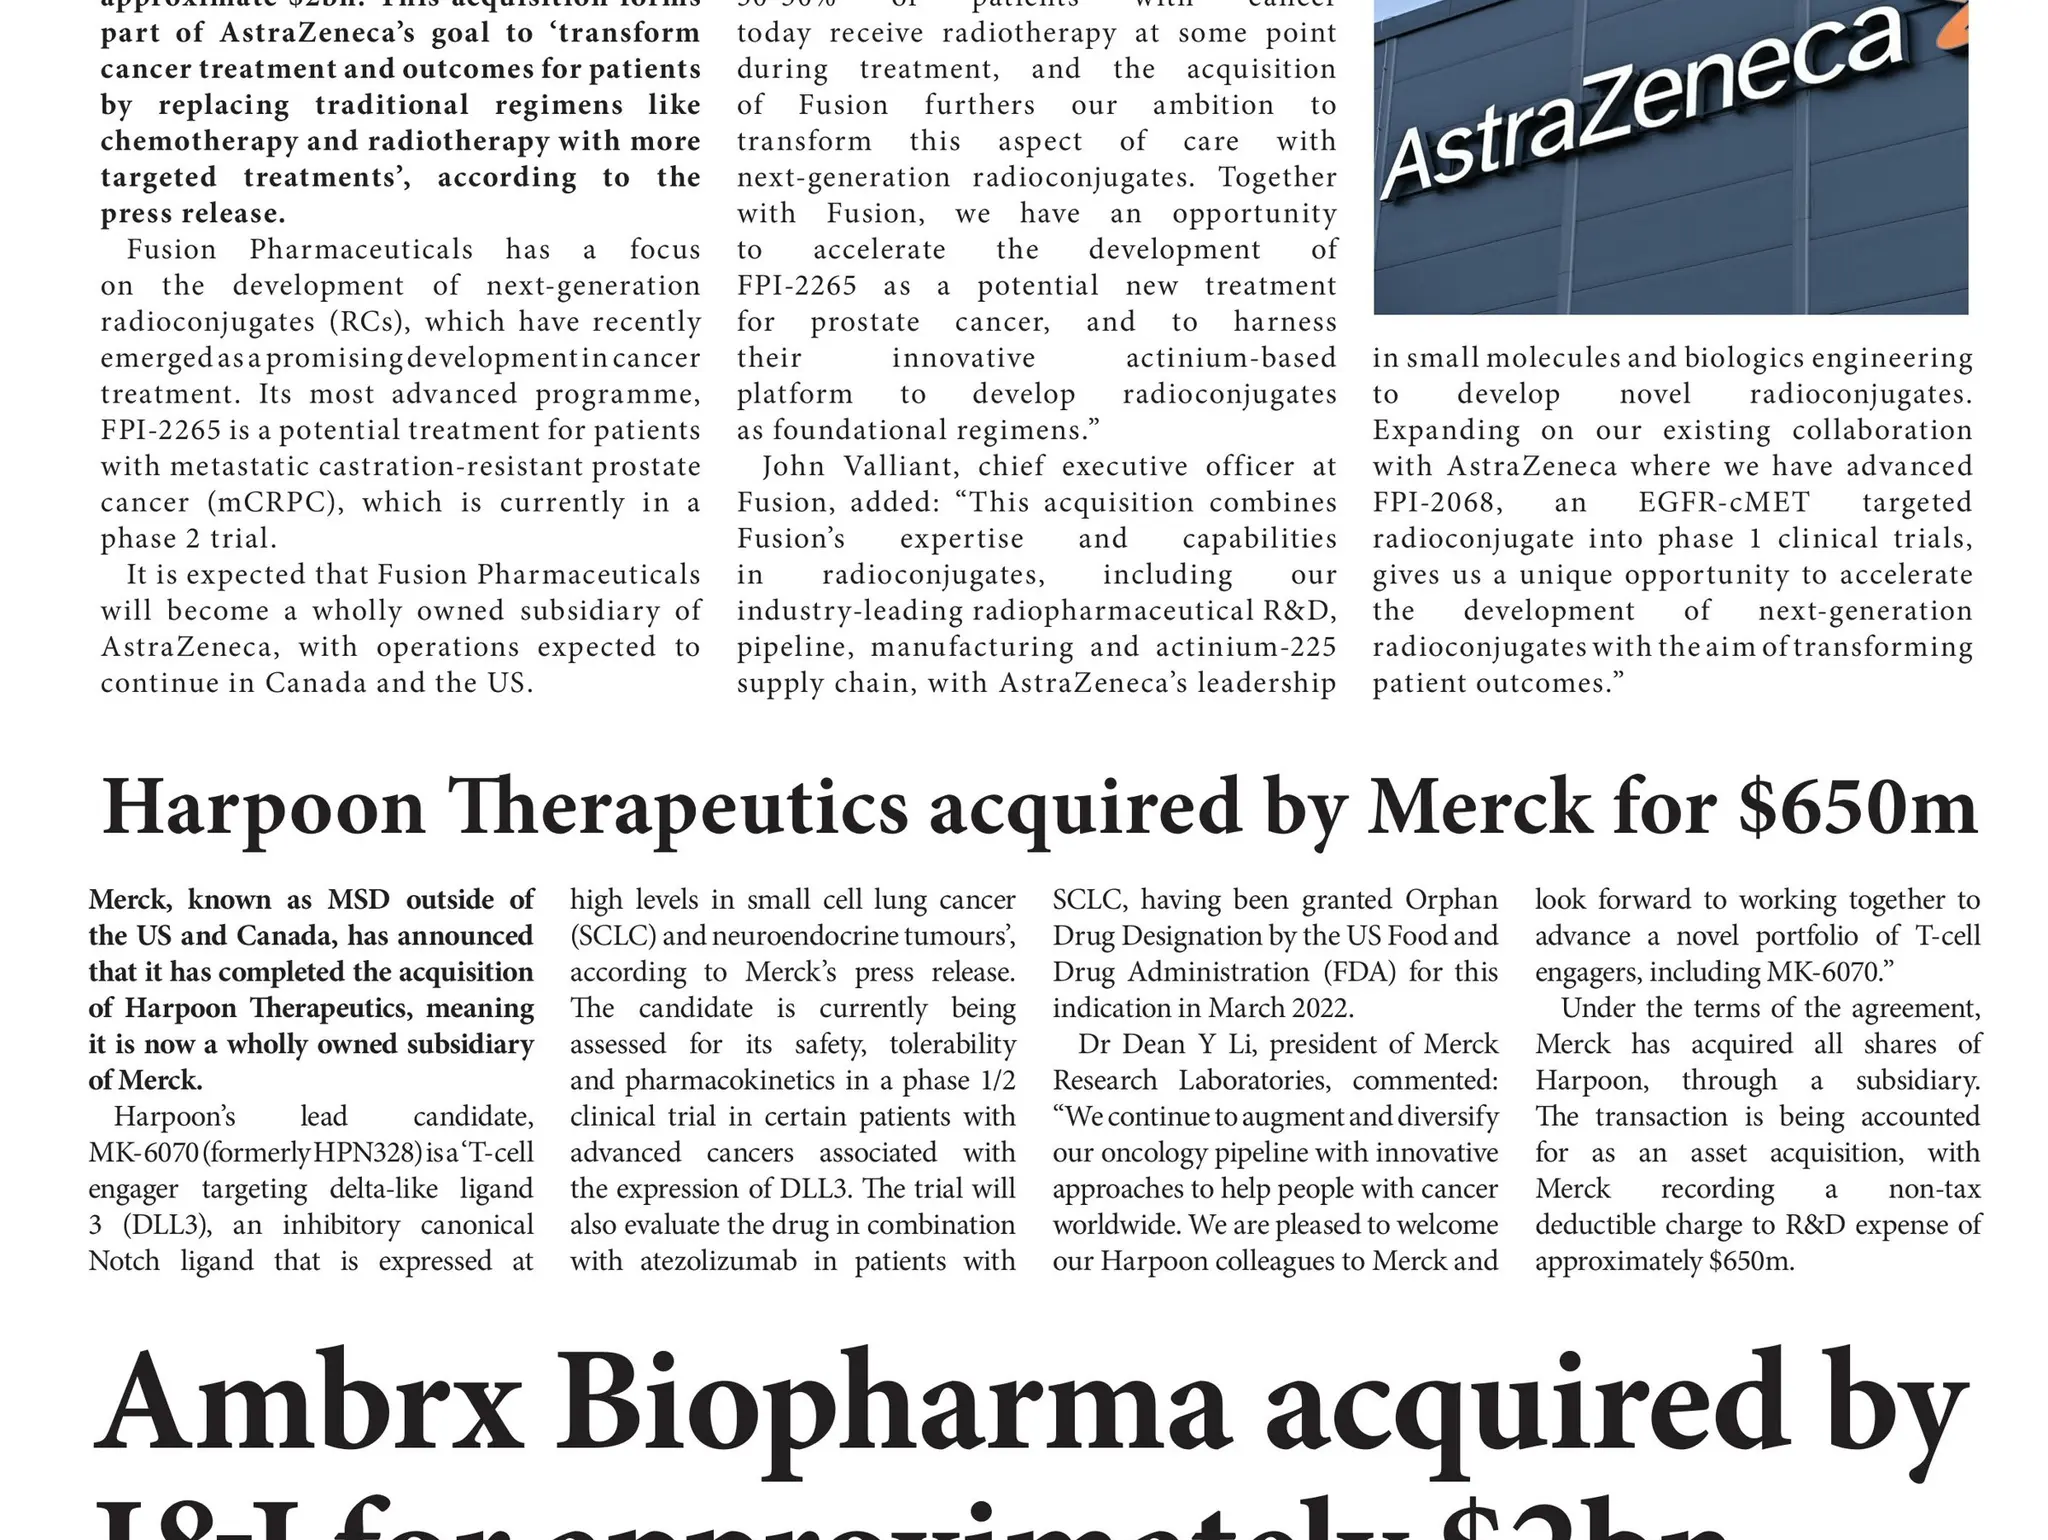 Harpoon Therapeutics acquired by Merck for $650m